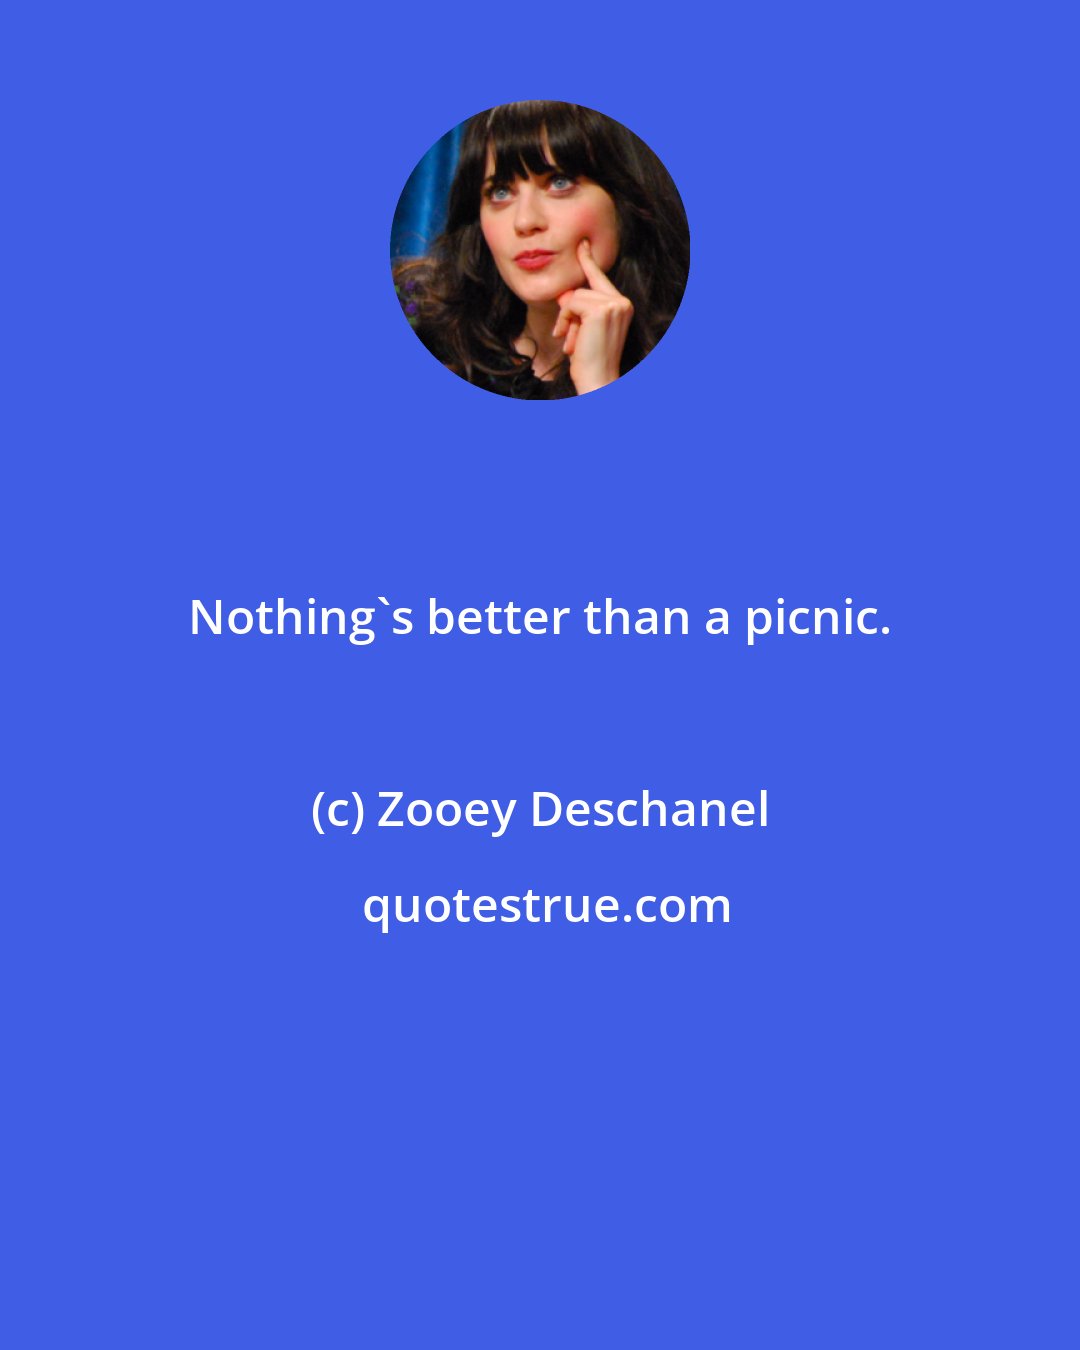 Zooey Deschanel: Nothing's better than a picnic.